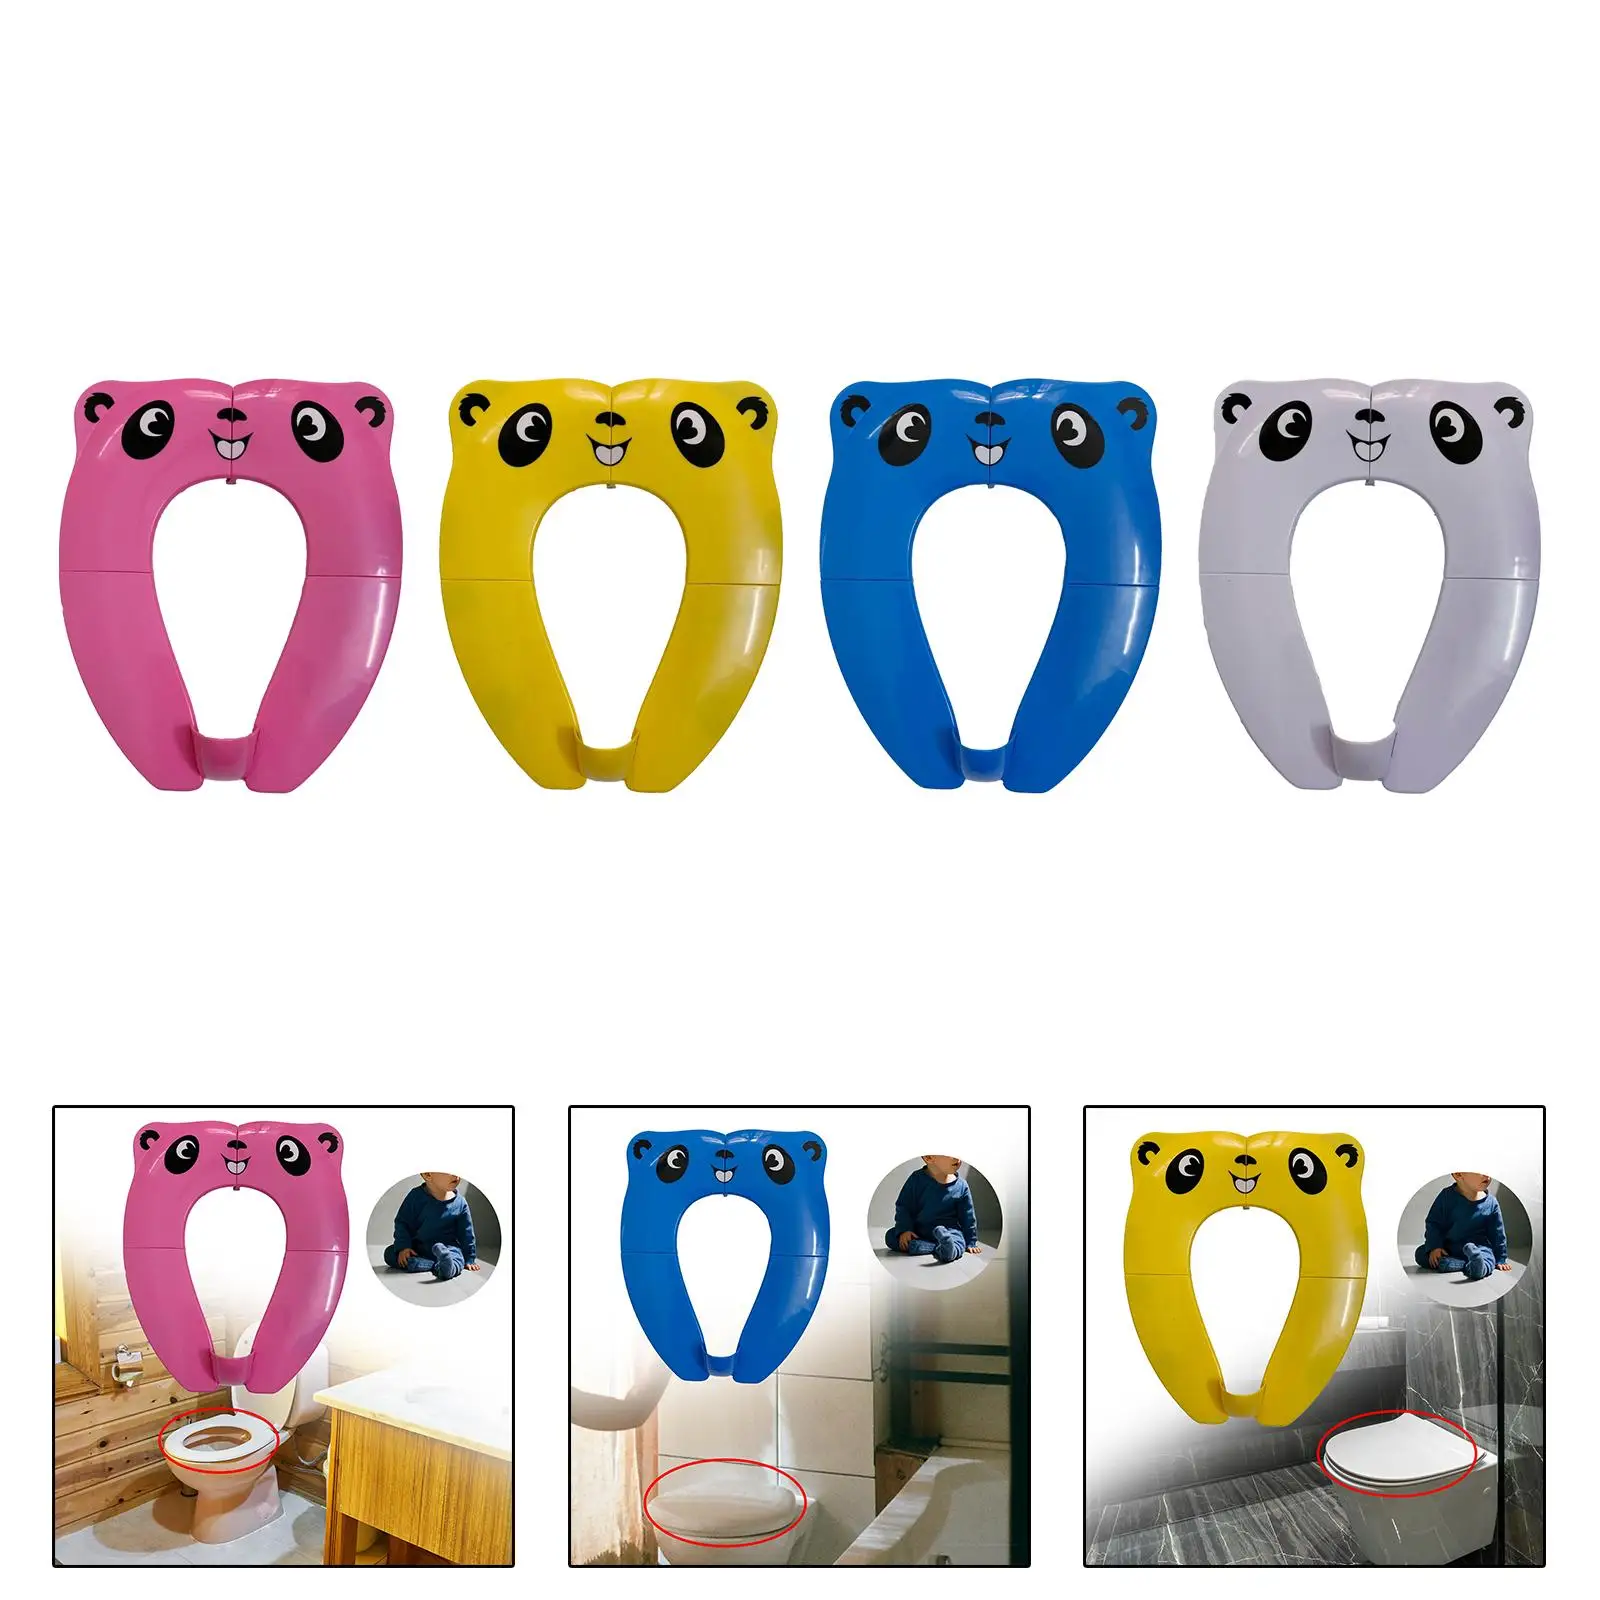 Portable Potty Seat, Folding Travel Potty Seat for Girls and Boys